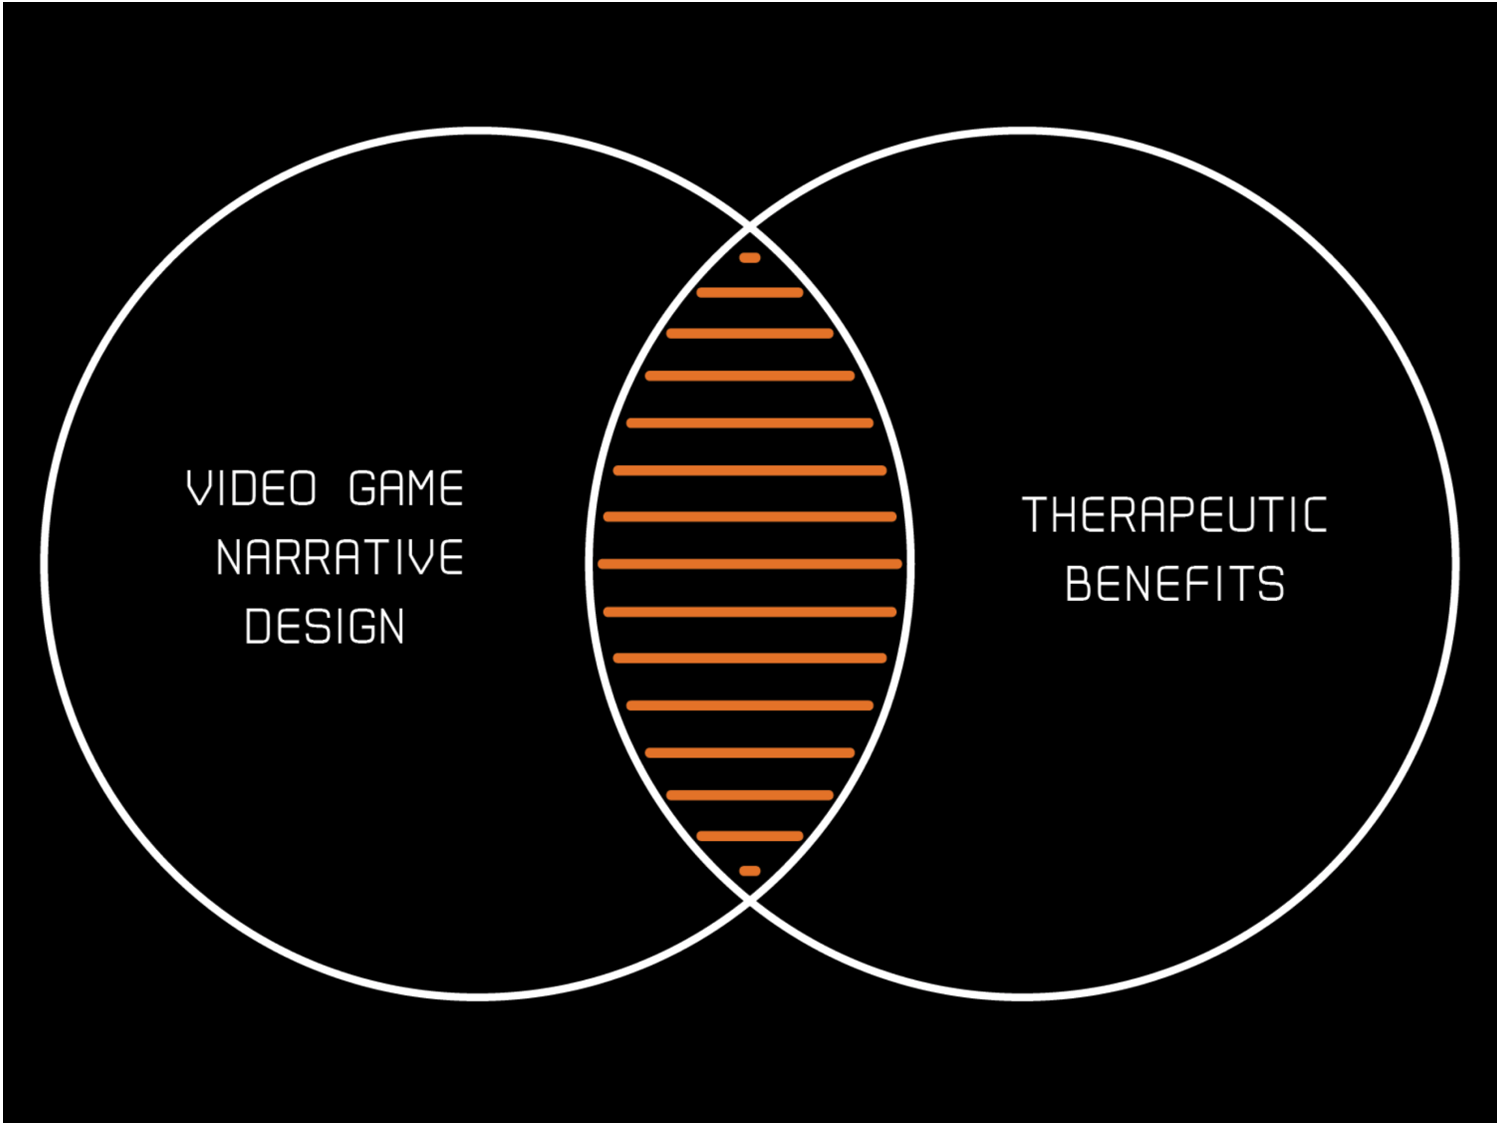 Venn diagram showing 'video game narrative design on one side, and 'therapeutic benefits' on the other.